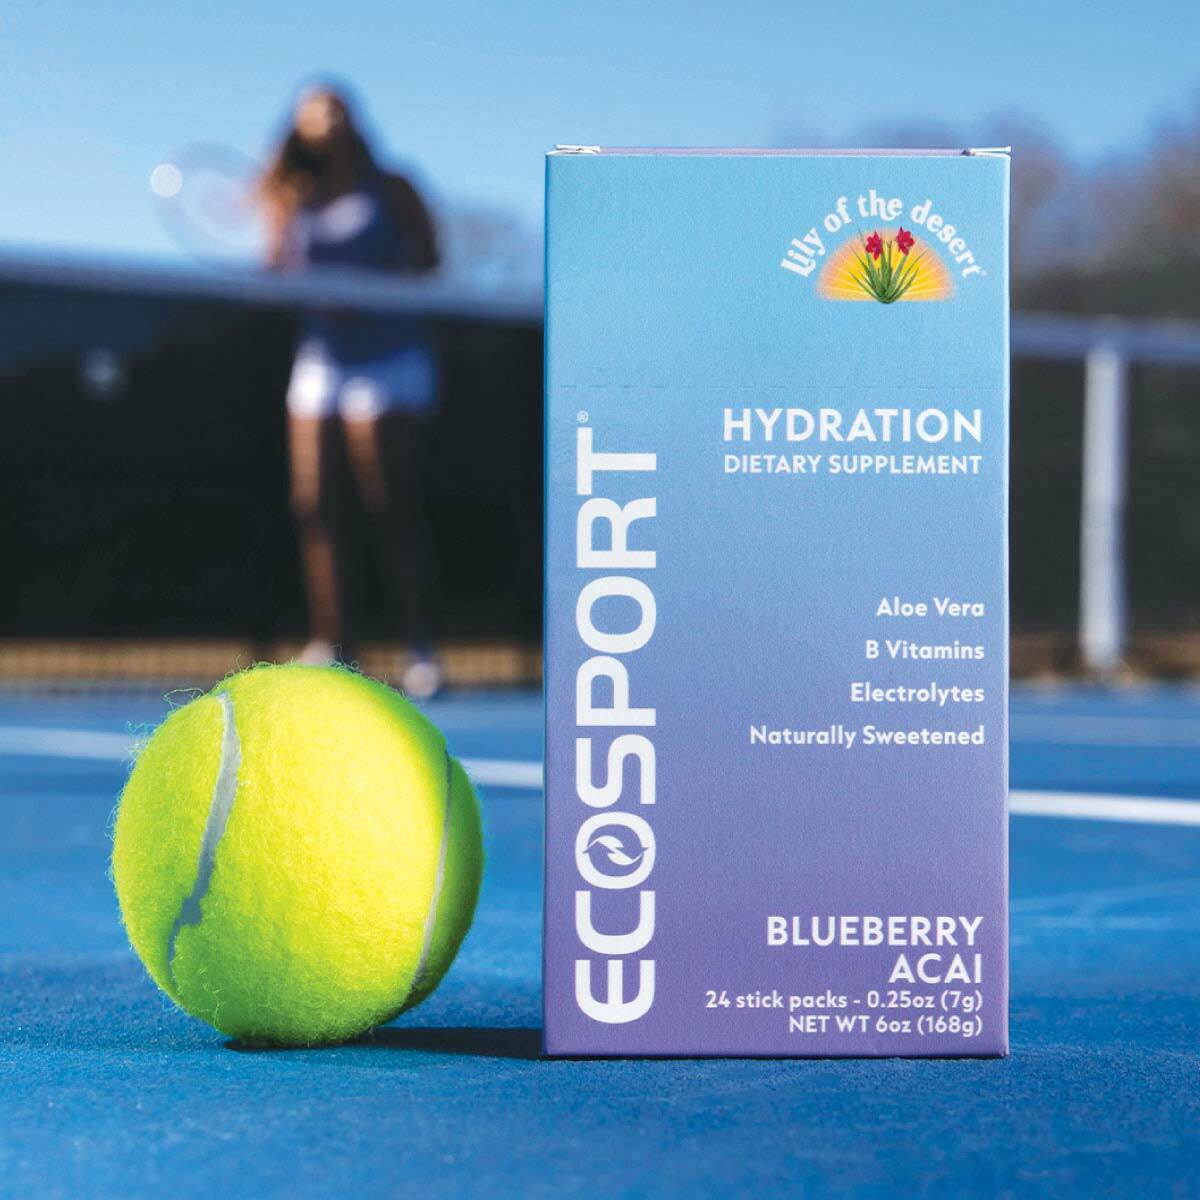 ecodrink for hydration support.